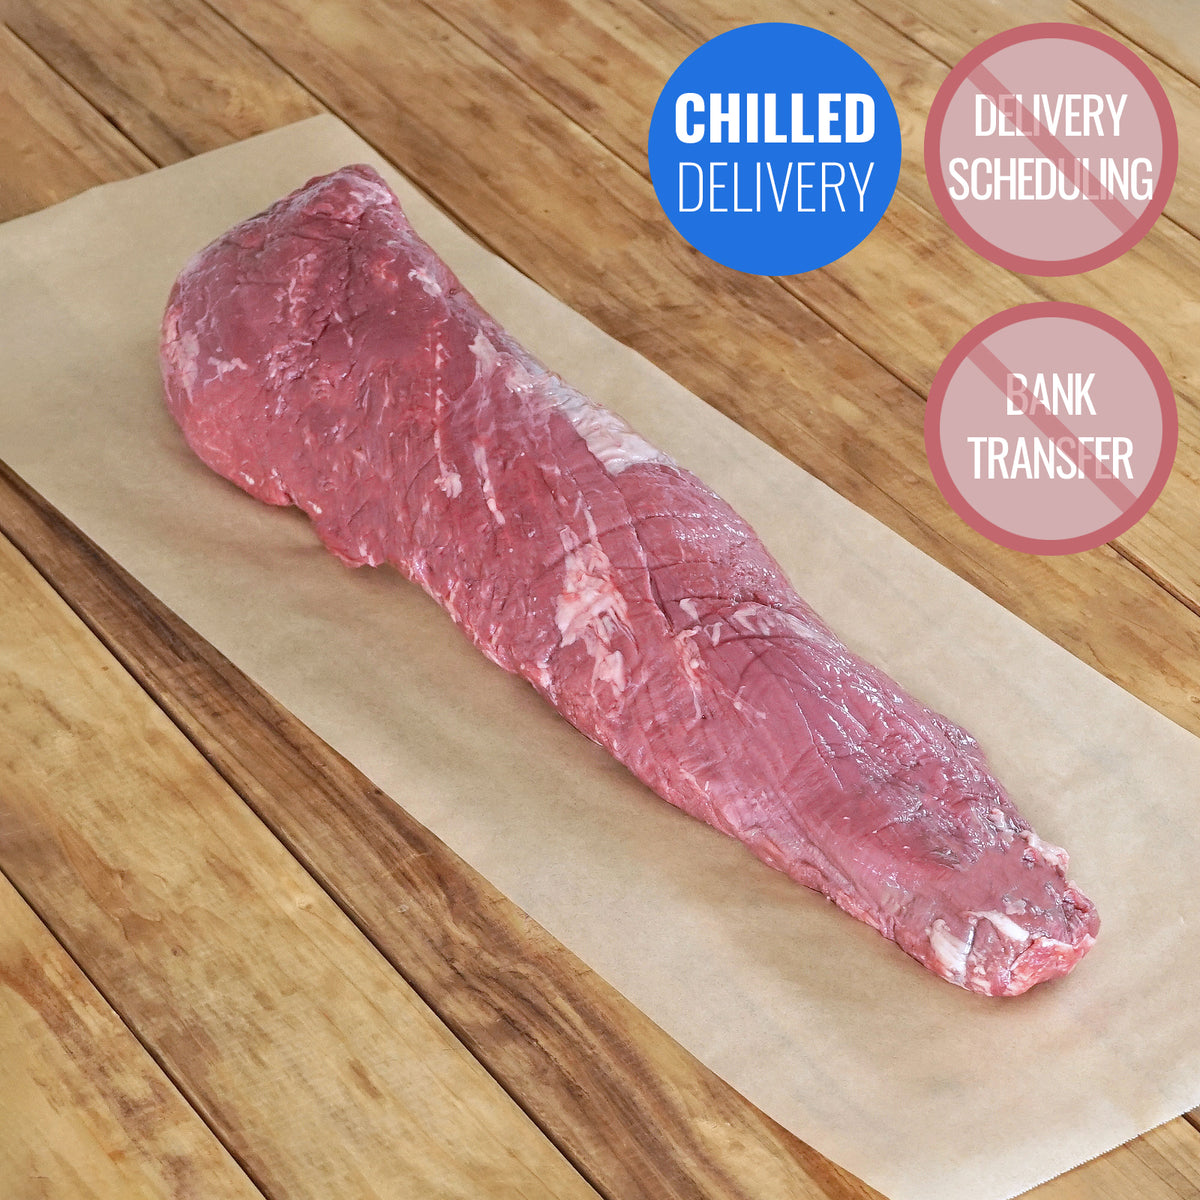 Chilled Grass-Fed Whole Beef Filet from New Zealand (2.2kg) (Free Shipping) (Terms & Conditions Apply) - Horizon Farms